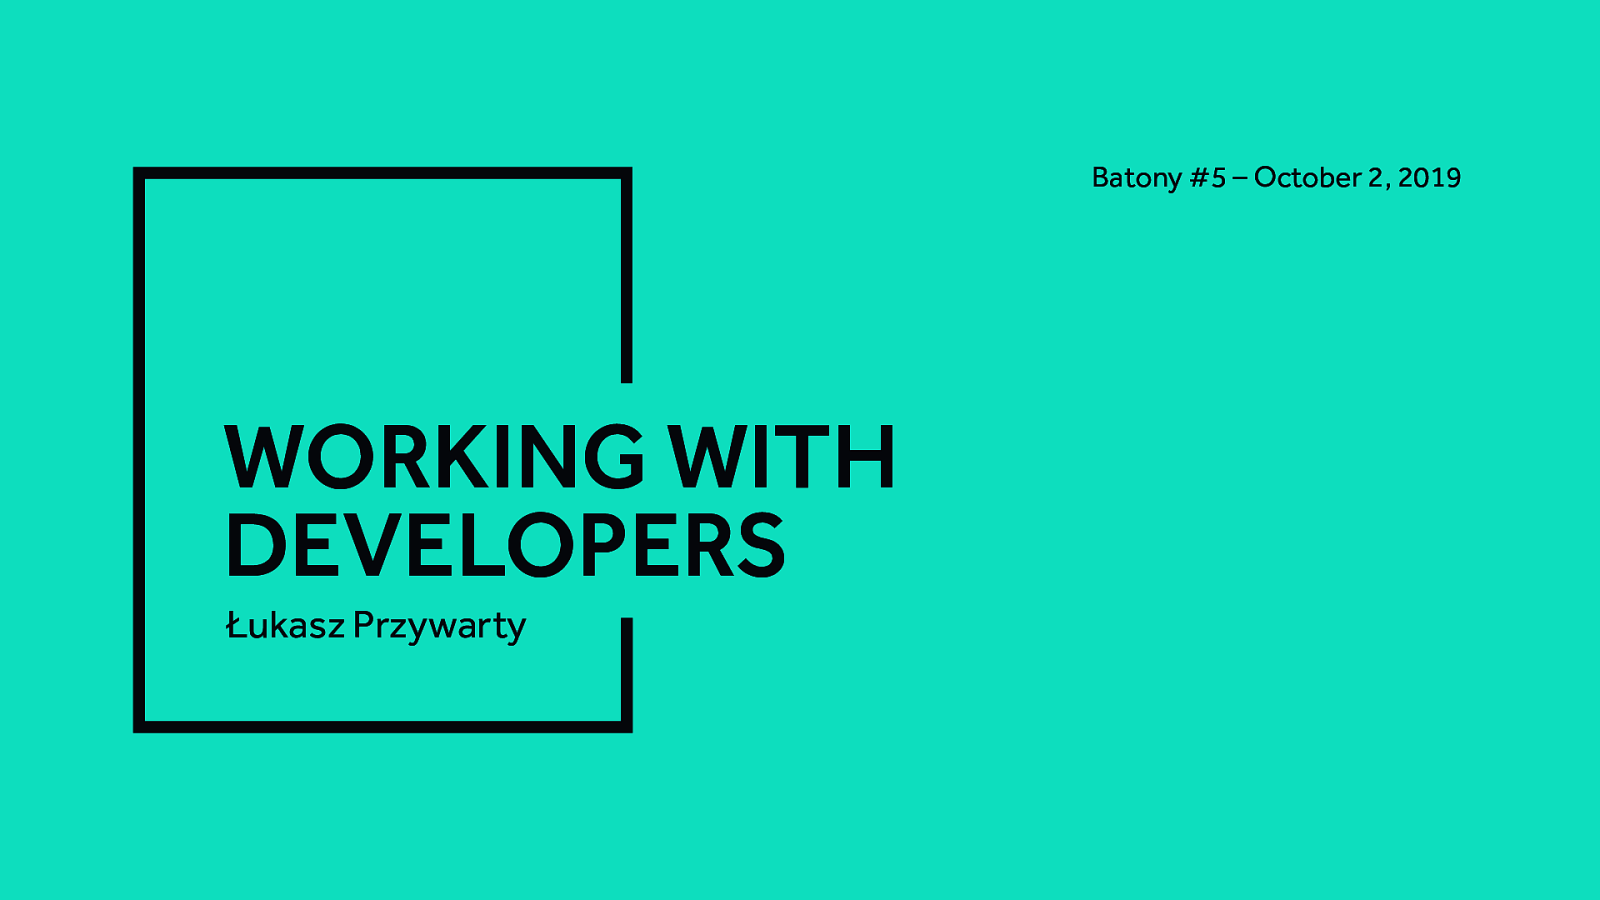 Working with developers